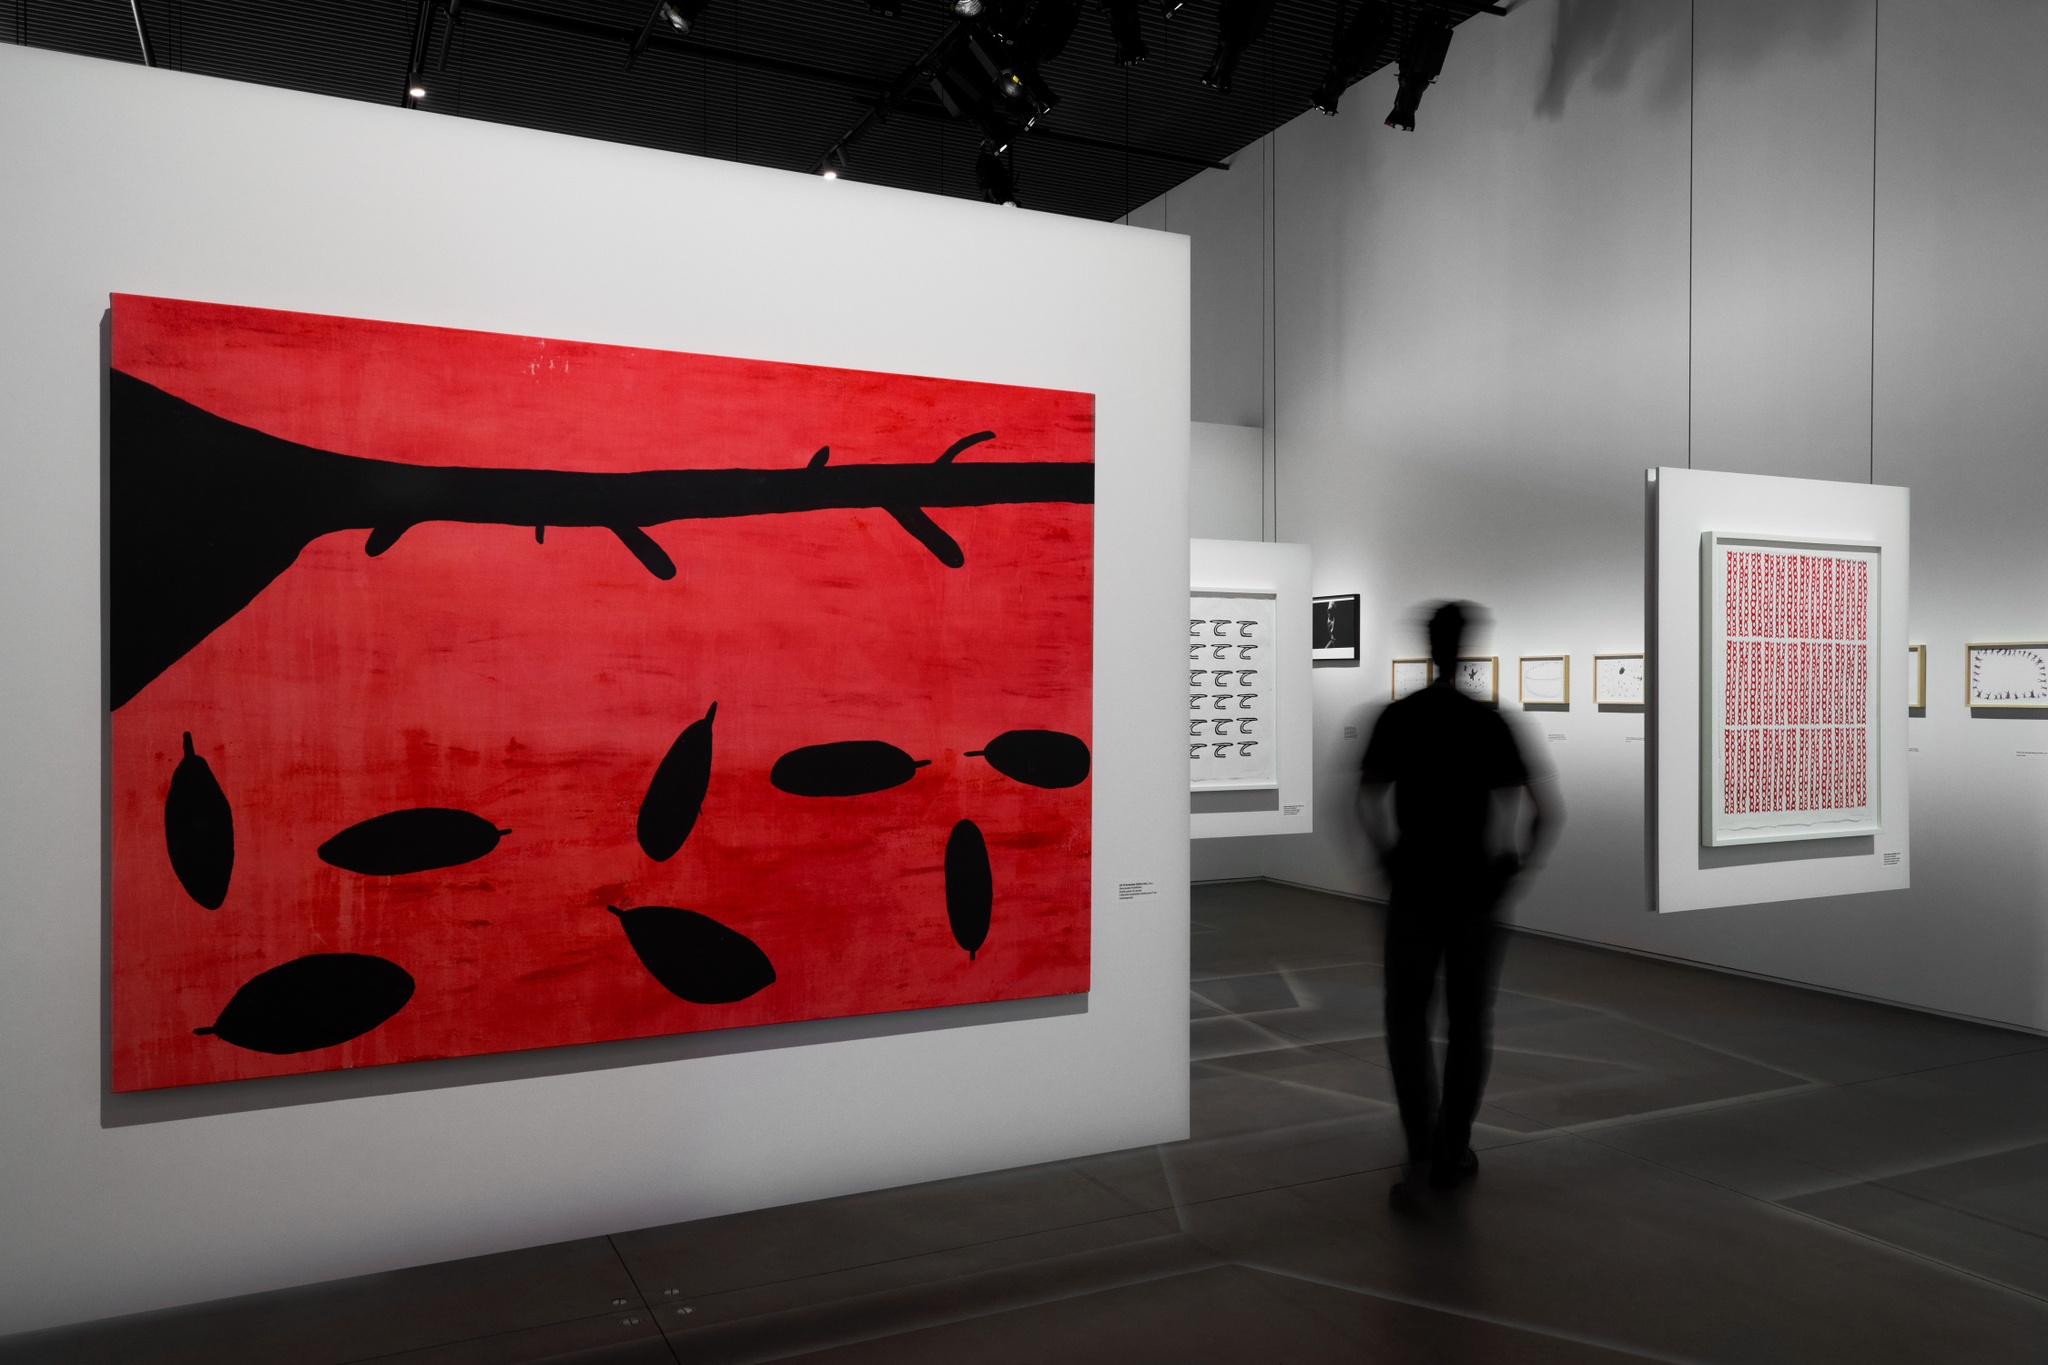 An art gallery with drawings and paintings hanging on fixed walls and suspended panels hanging from the ceiling. A visitor walks away between two suspended panels. In the foreground, is a rectangular painting hung on a horizontal orientation. It depicts bold black shapes that recall a fallen tree branch and large leaves against a bright red background. 